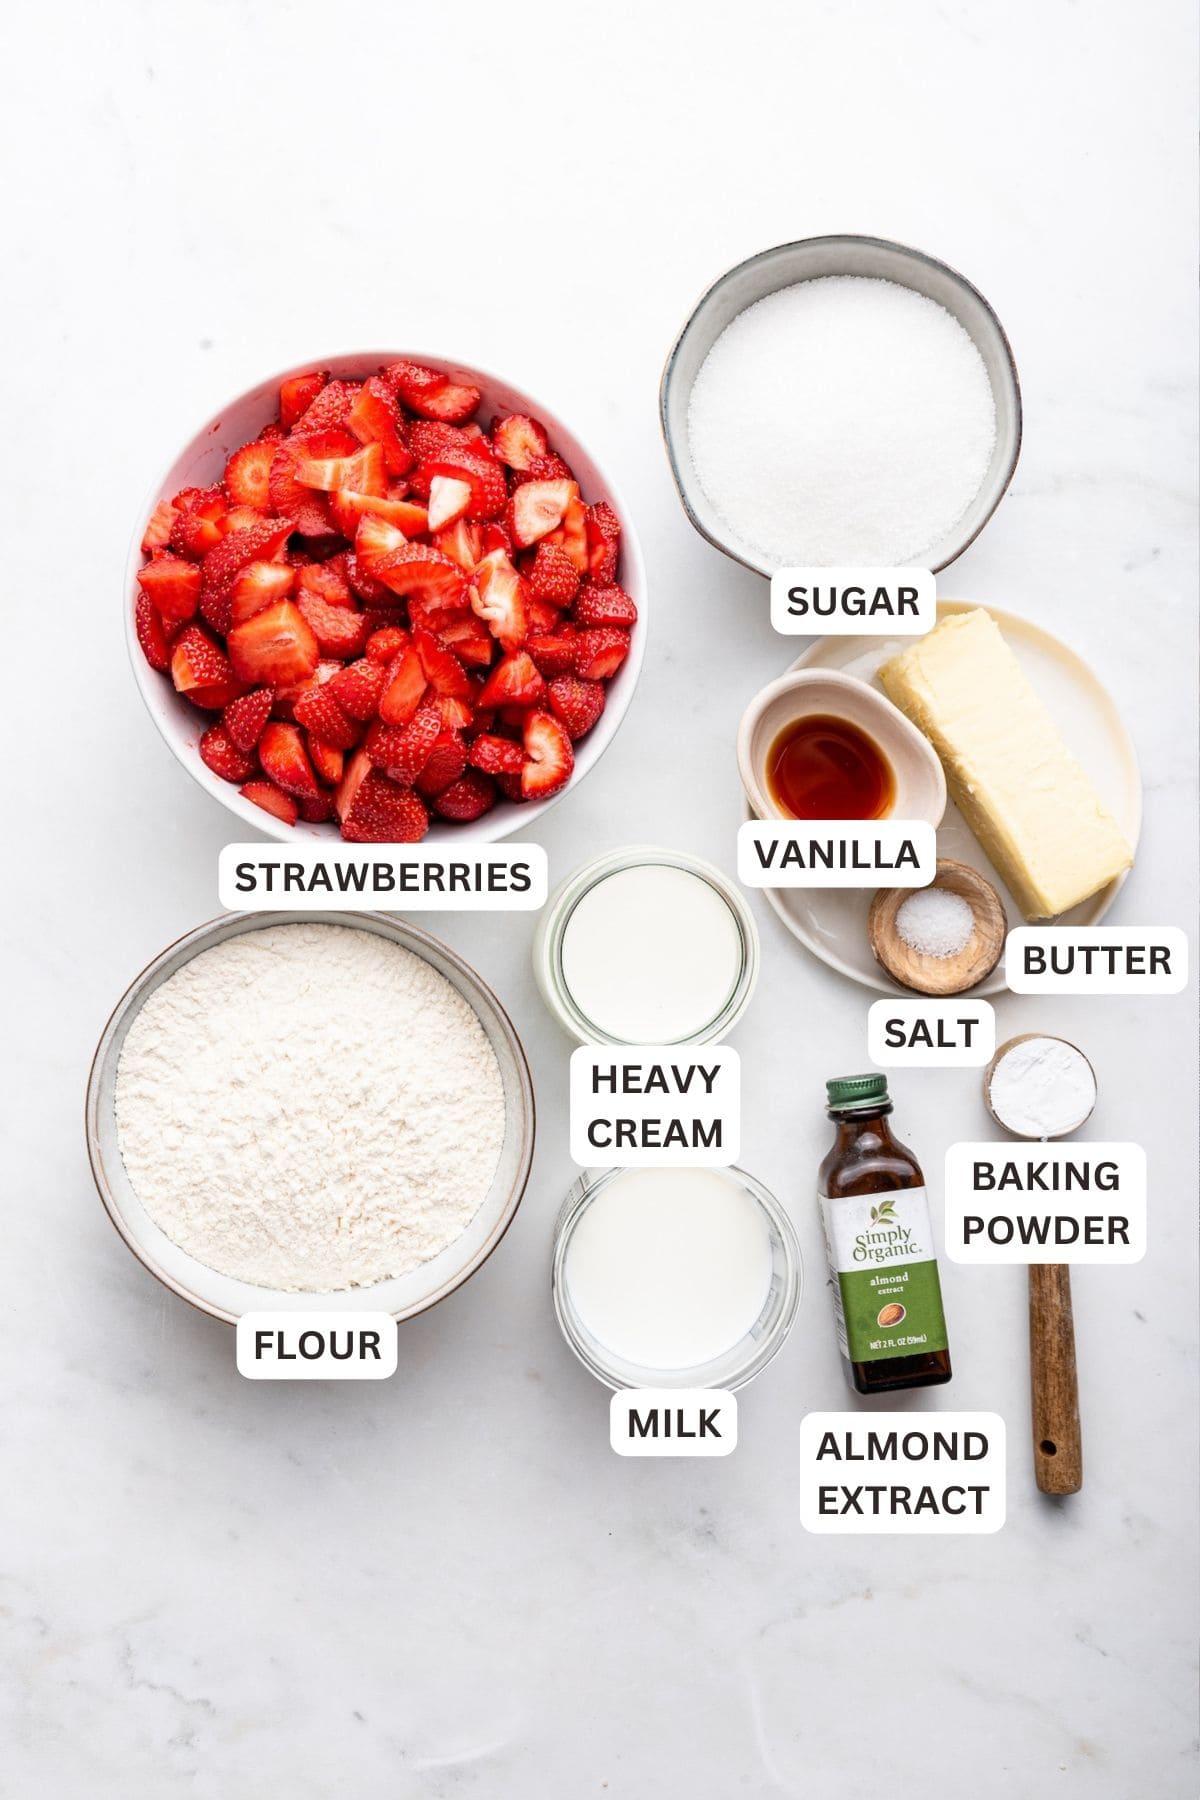 Overhead view of ingredients for strawberry cobbler